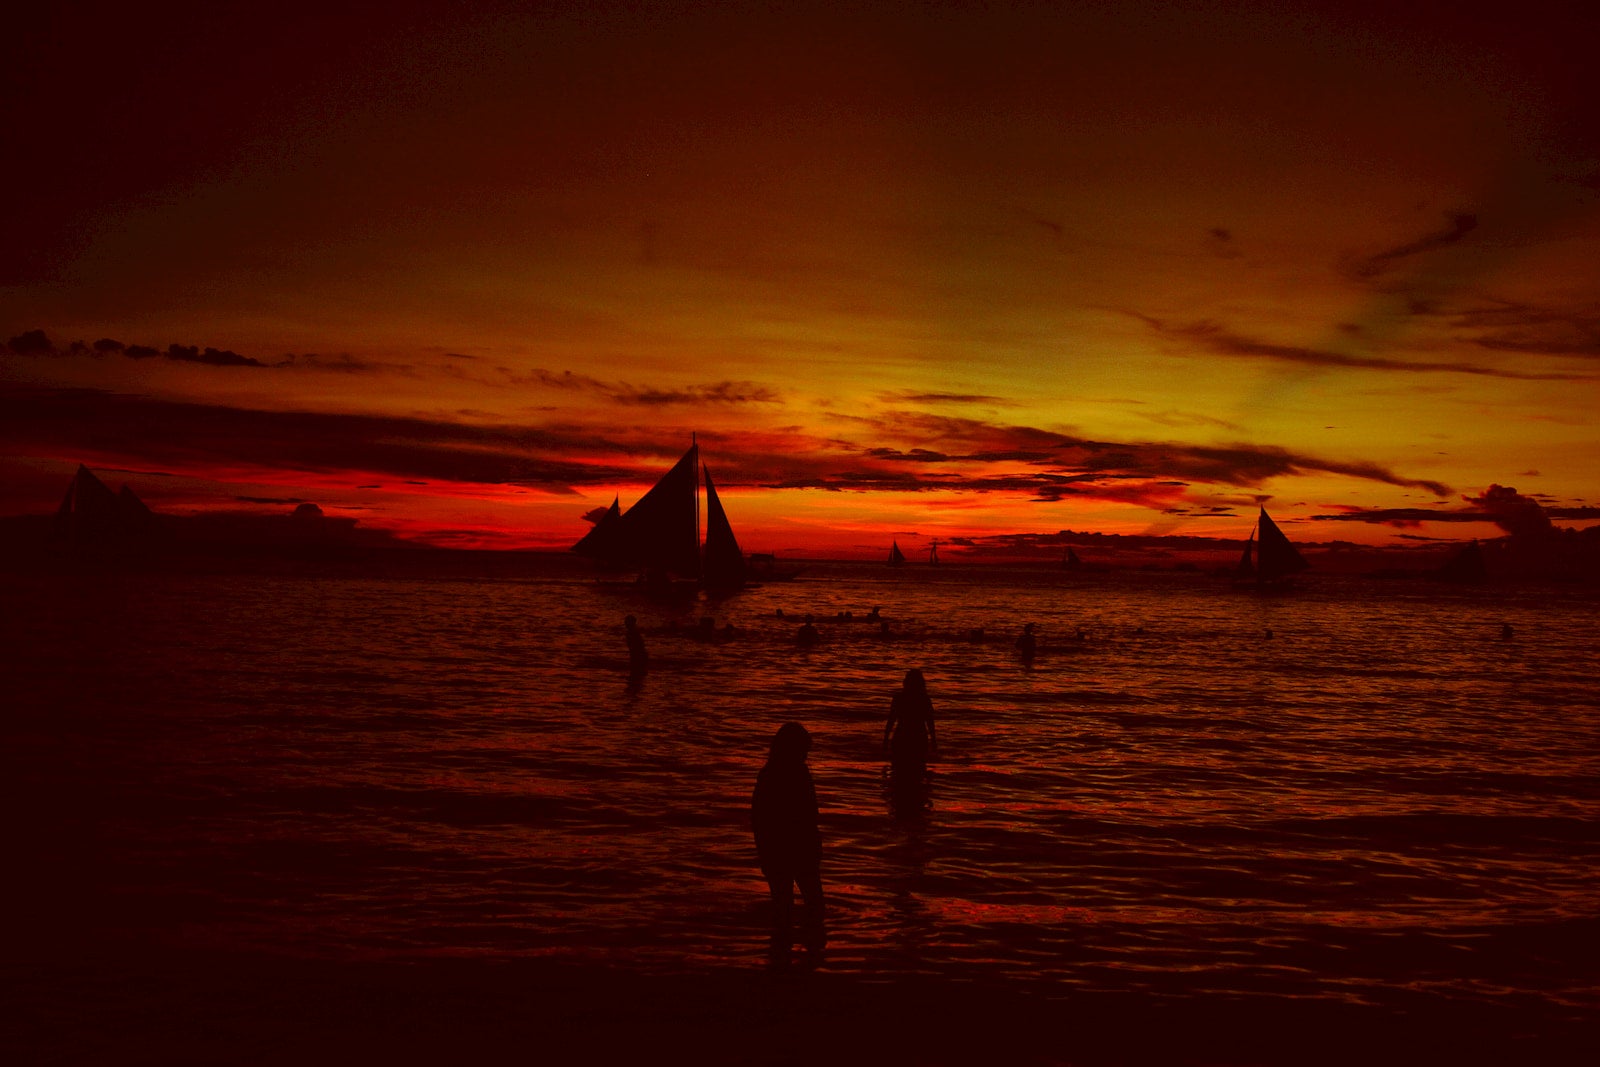 People on the beach overlooking sailboats at sunset.